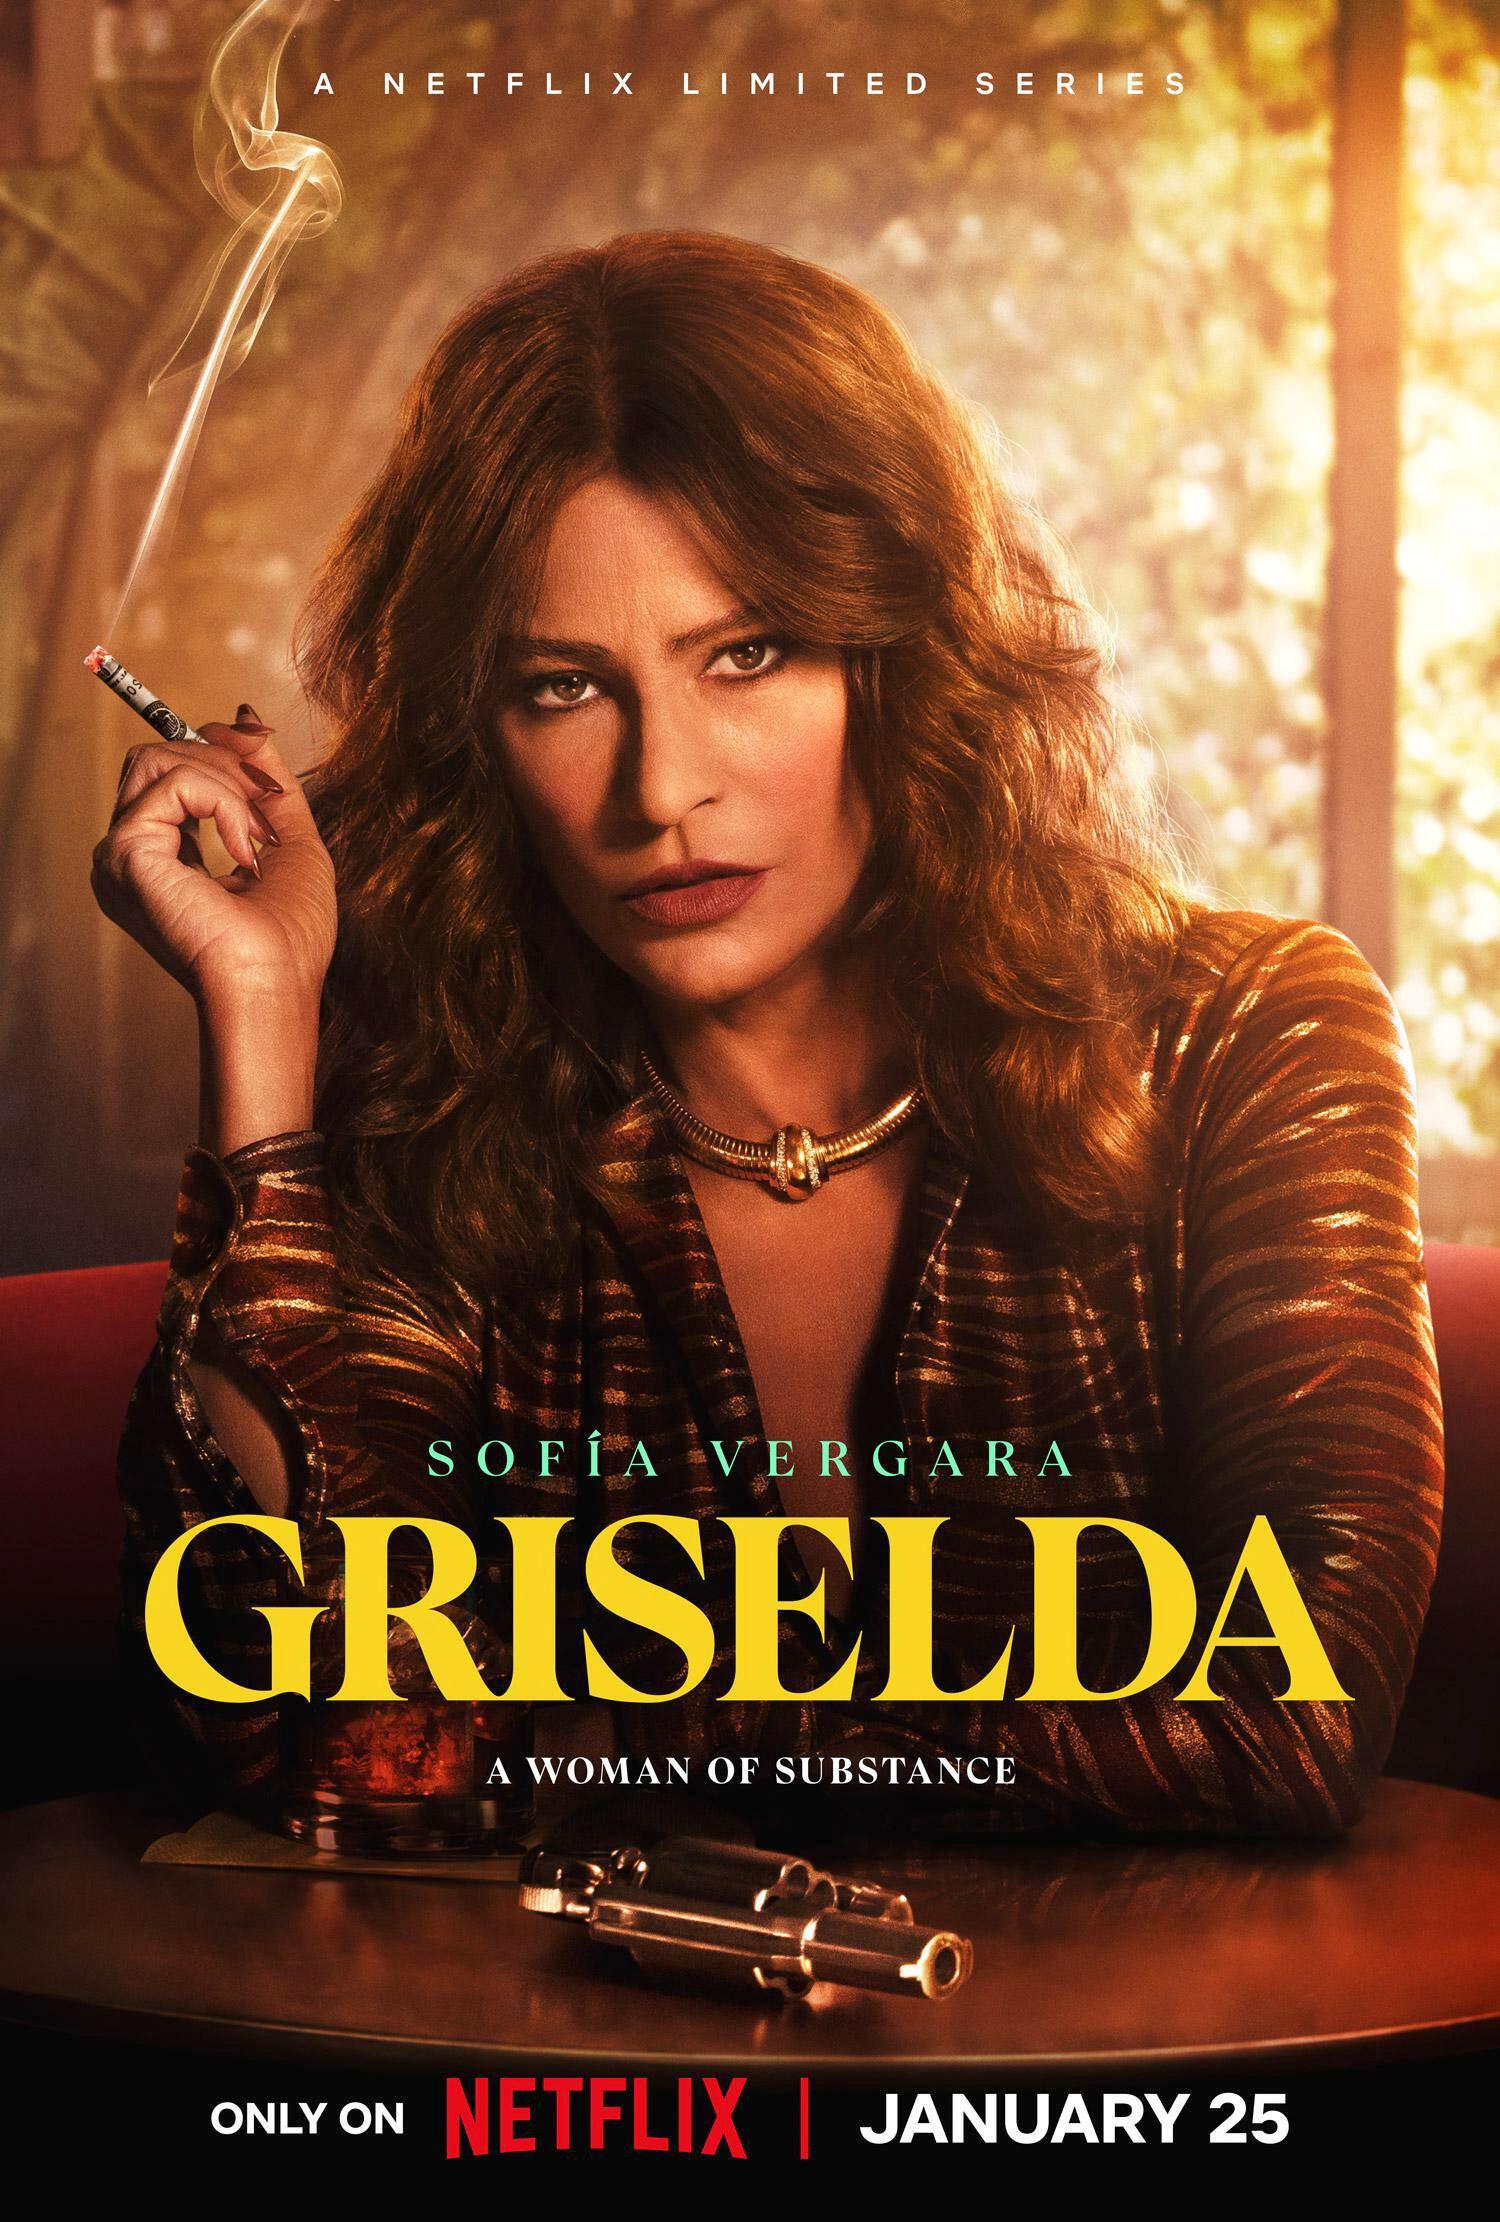 Sofia is playing the lead role in the new series Griselda